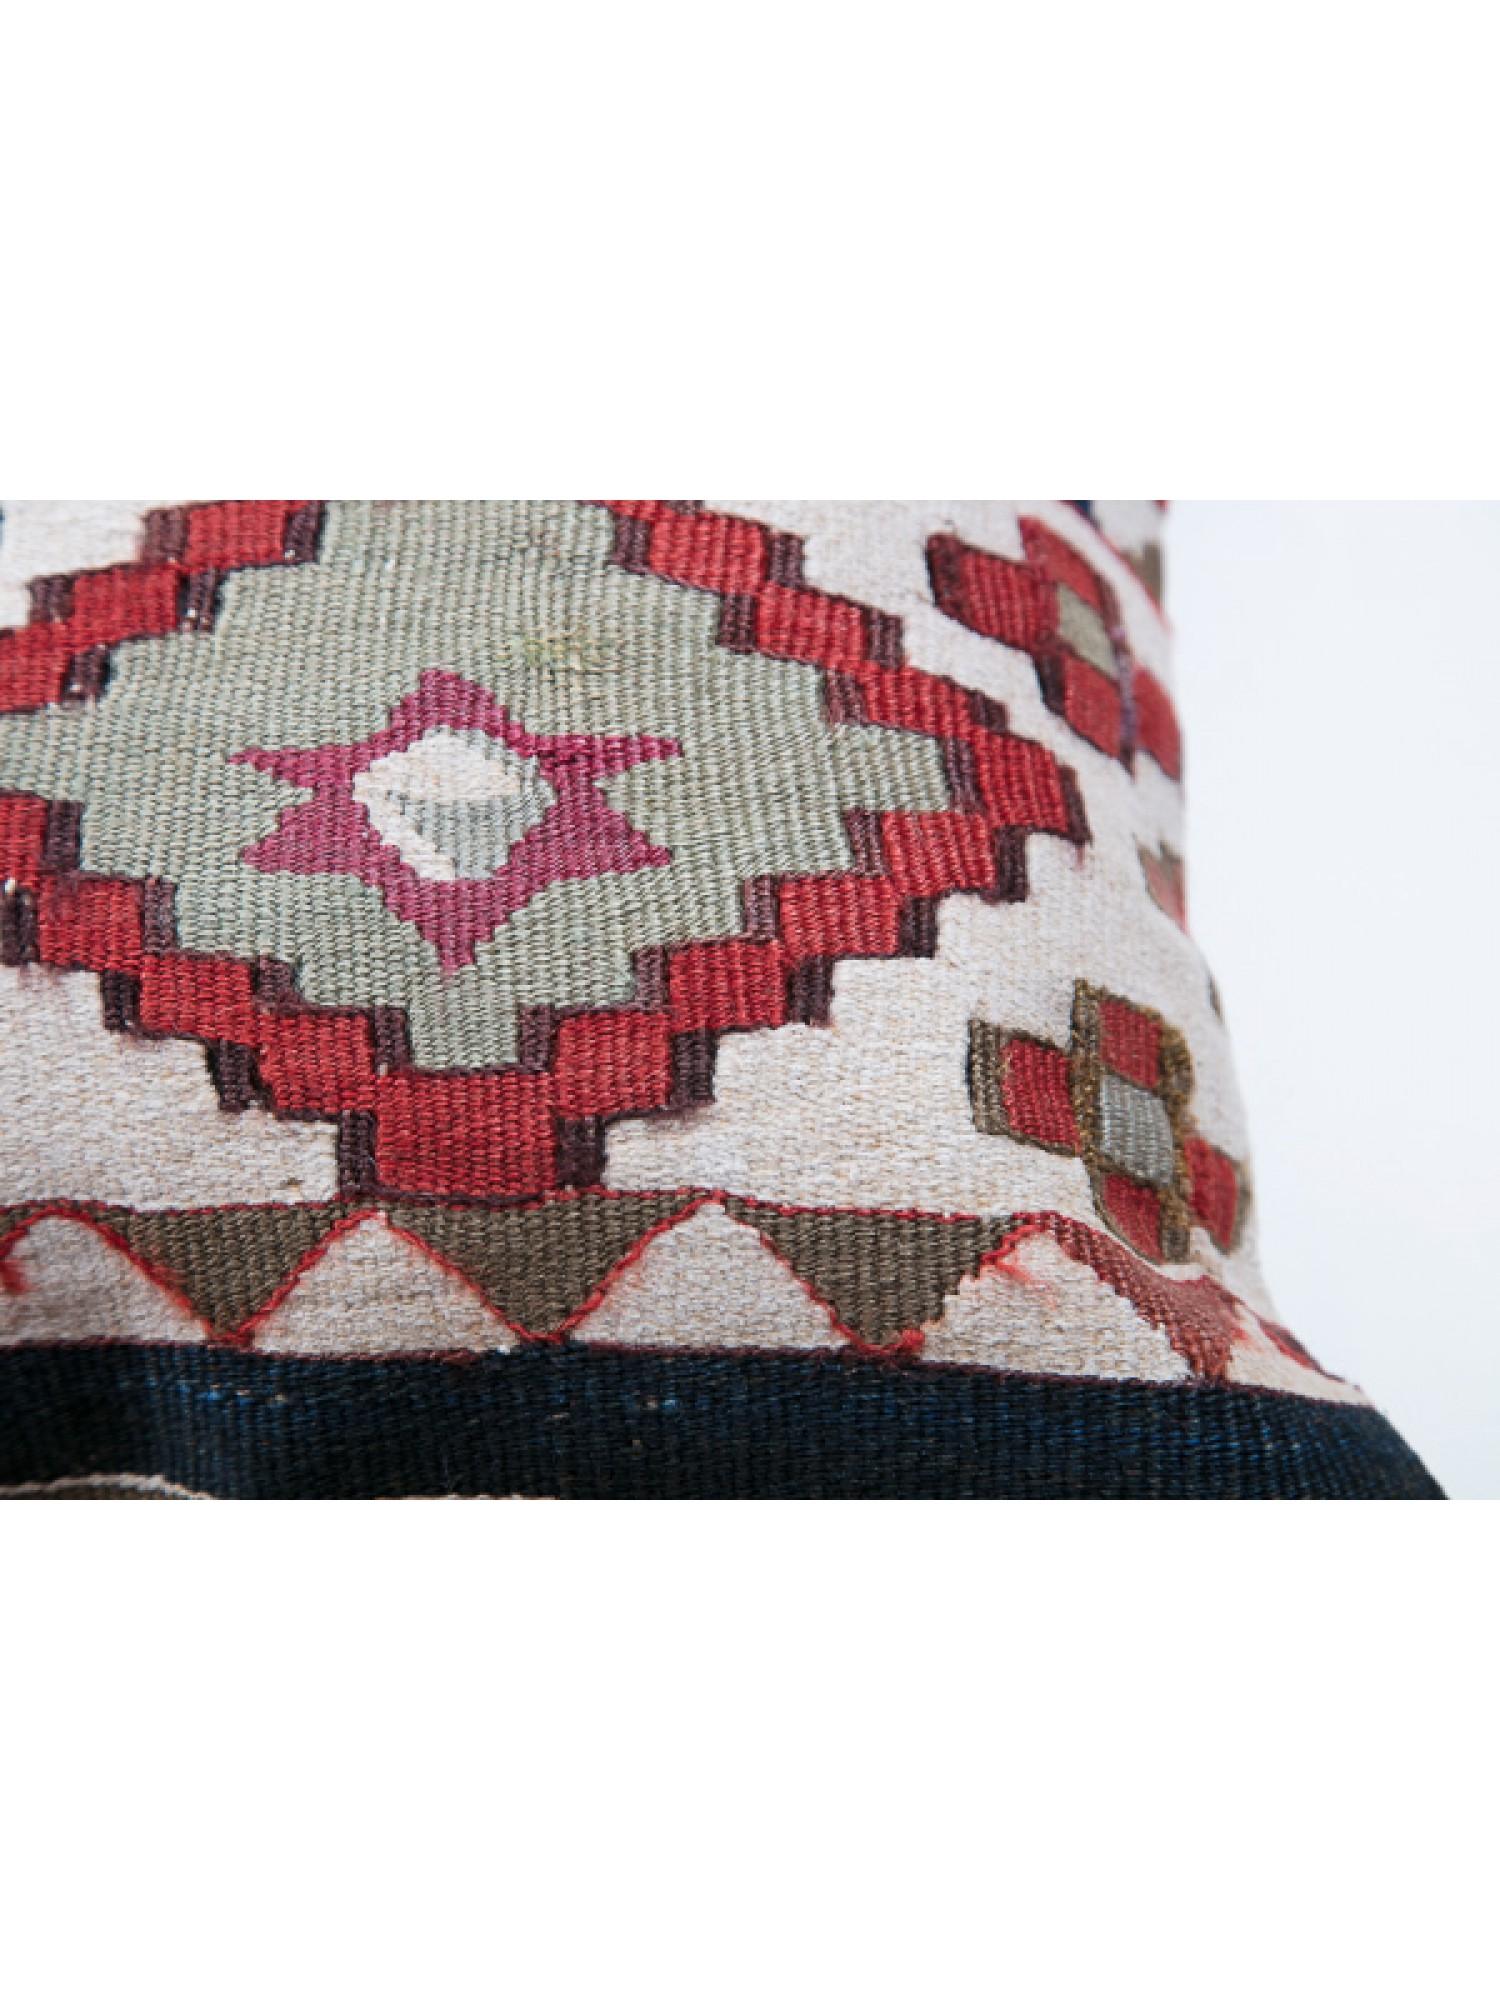 Contemporary Antique & Old Kilim Cushion Cover, Anatolian Yastik Turkish Modern Pillow KC3497 For Sale